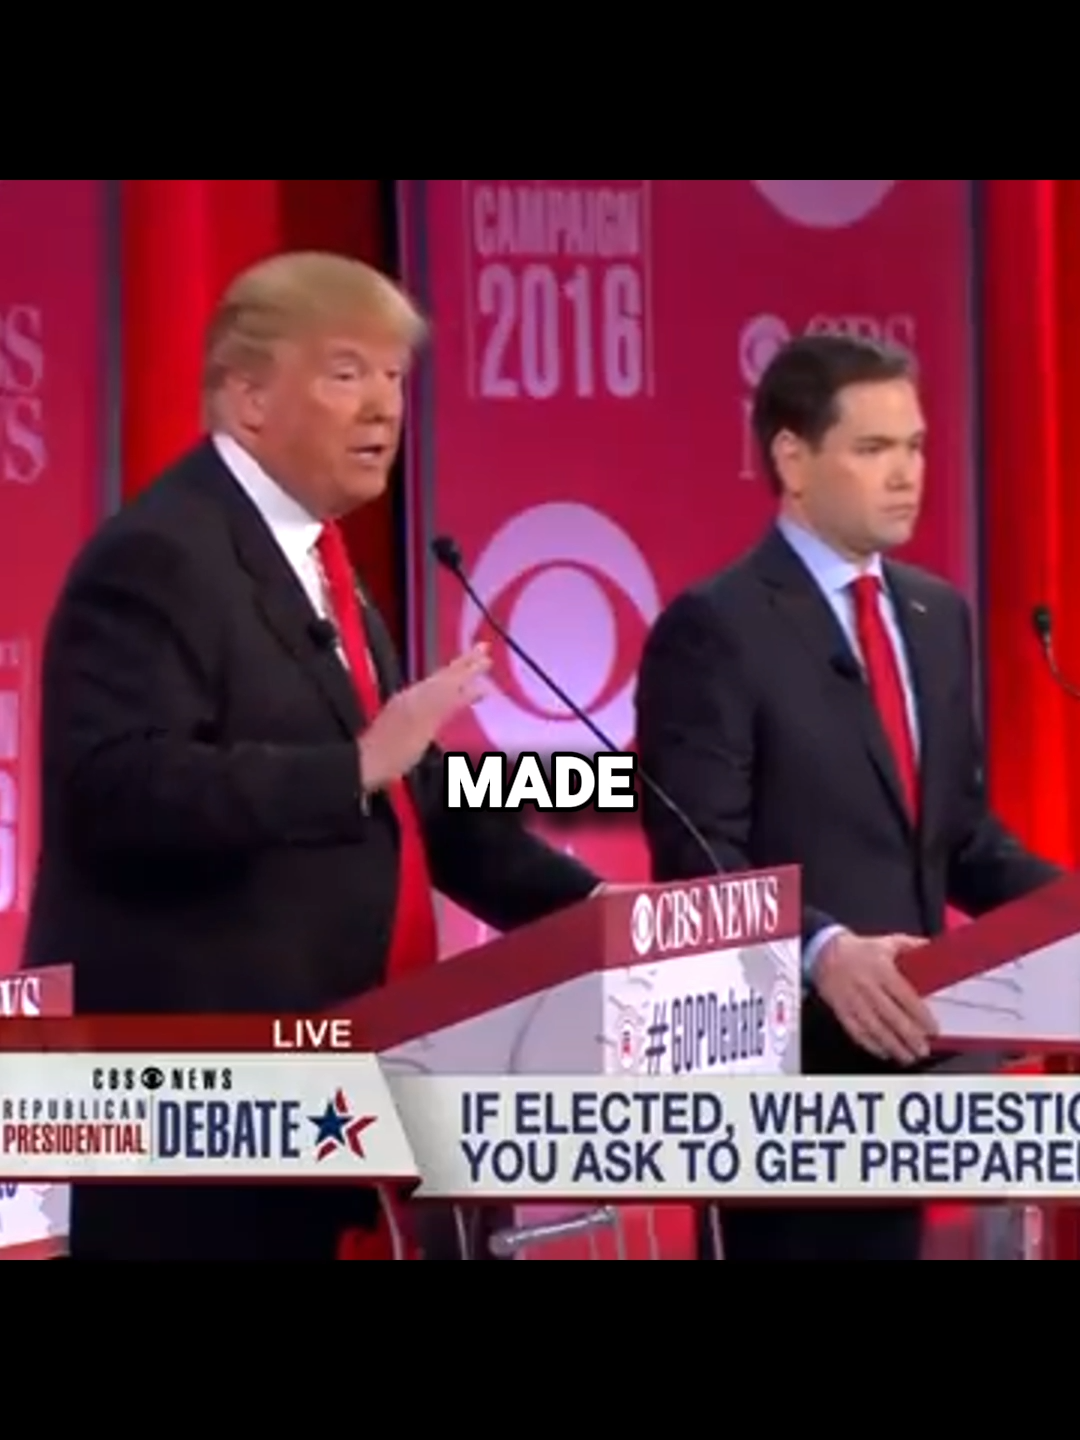 (3/10) Trump exposes the misguided strategy in Syria Moderator: Governor Bush you said defeating ISIS requires defeating Asad... Trump: Jeb is so wrong.... proceeds with a mic drop moment Ninth GOP Debate - February 13, 2016 (CBS)